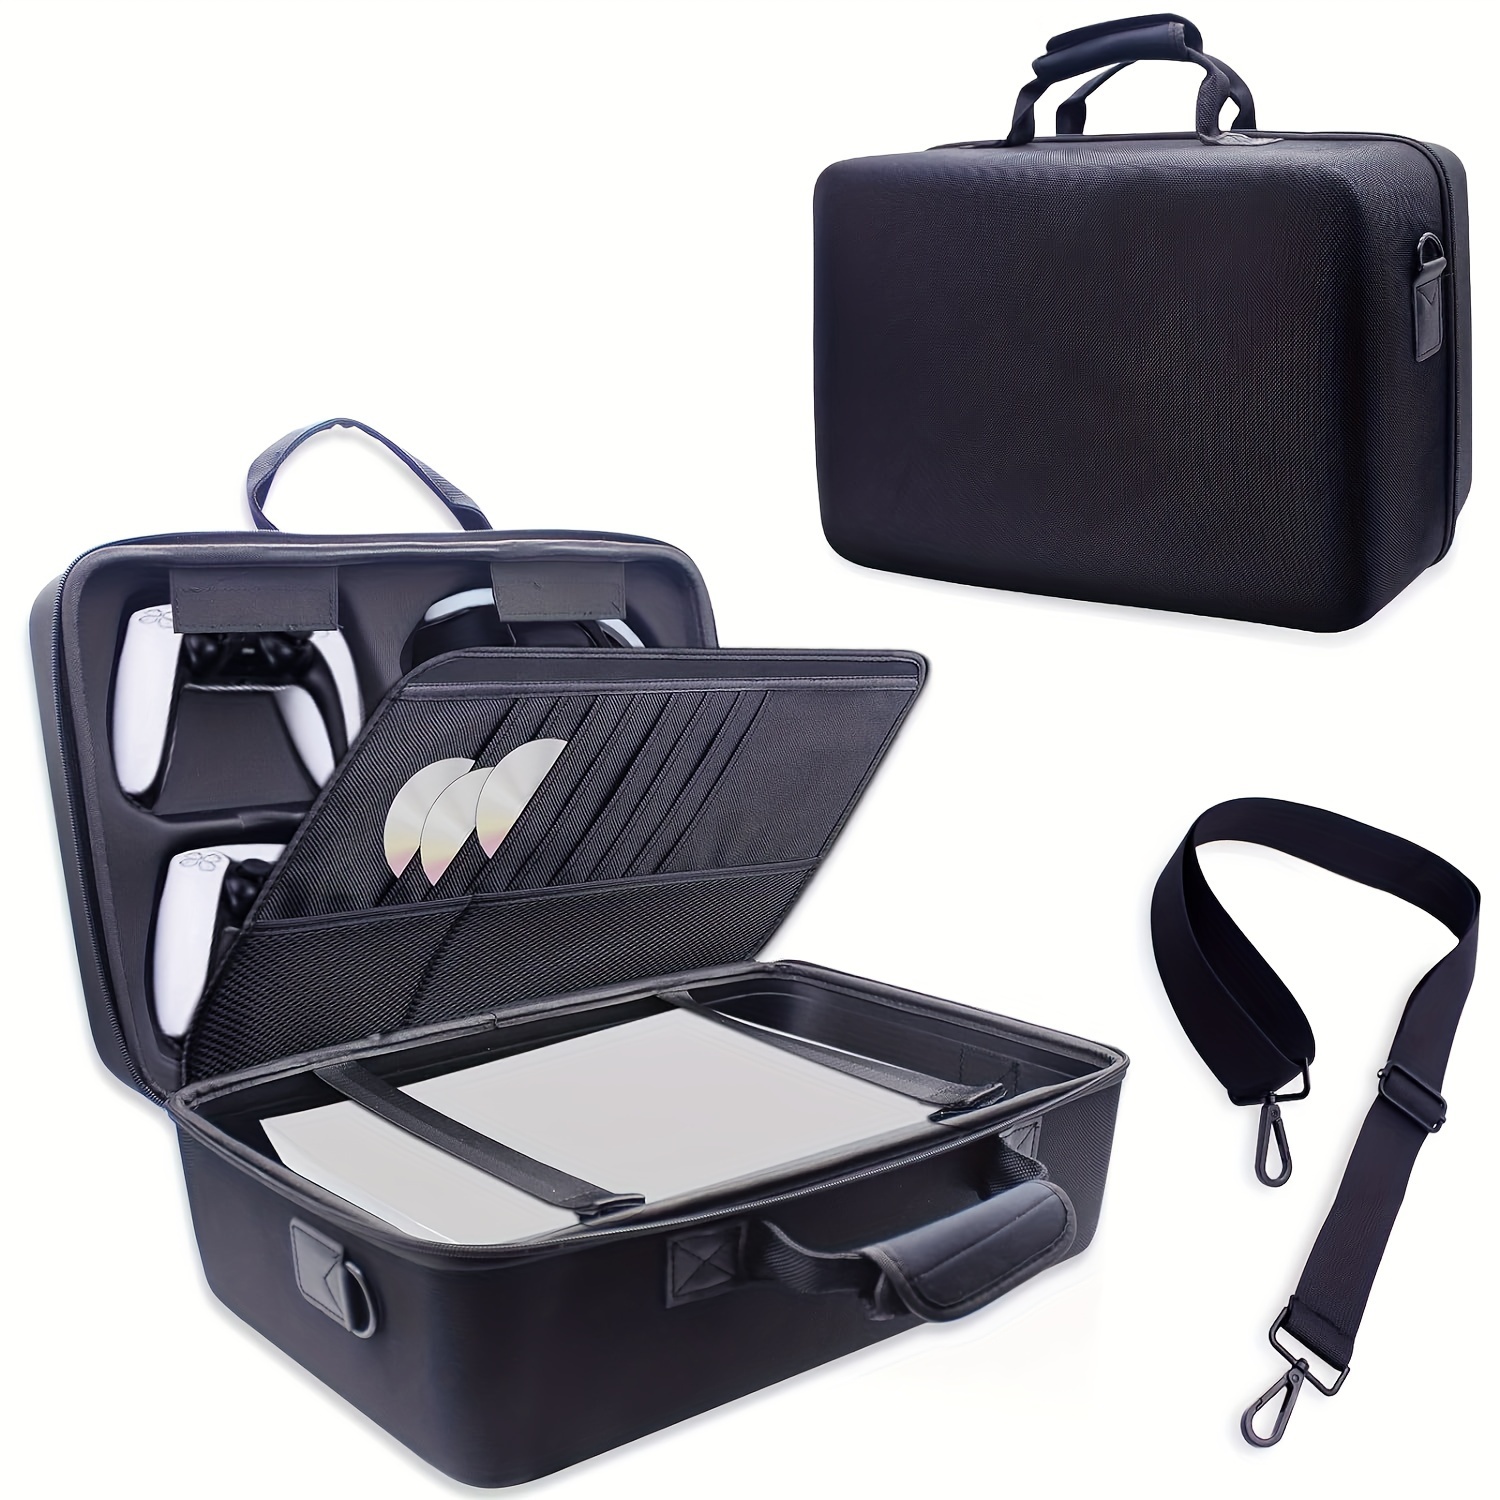 Carrying Case for PS5 Slim Hard Shell Carry Case Travel Bag Shockproof  Protective Case for PS5 Slim Console Accessories